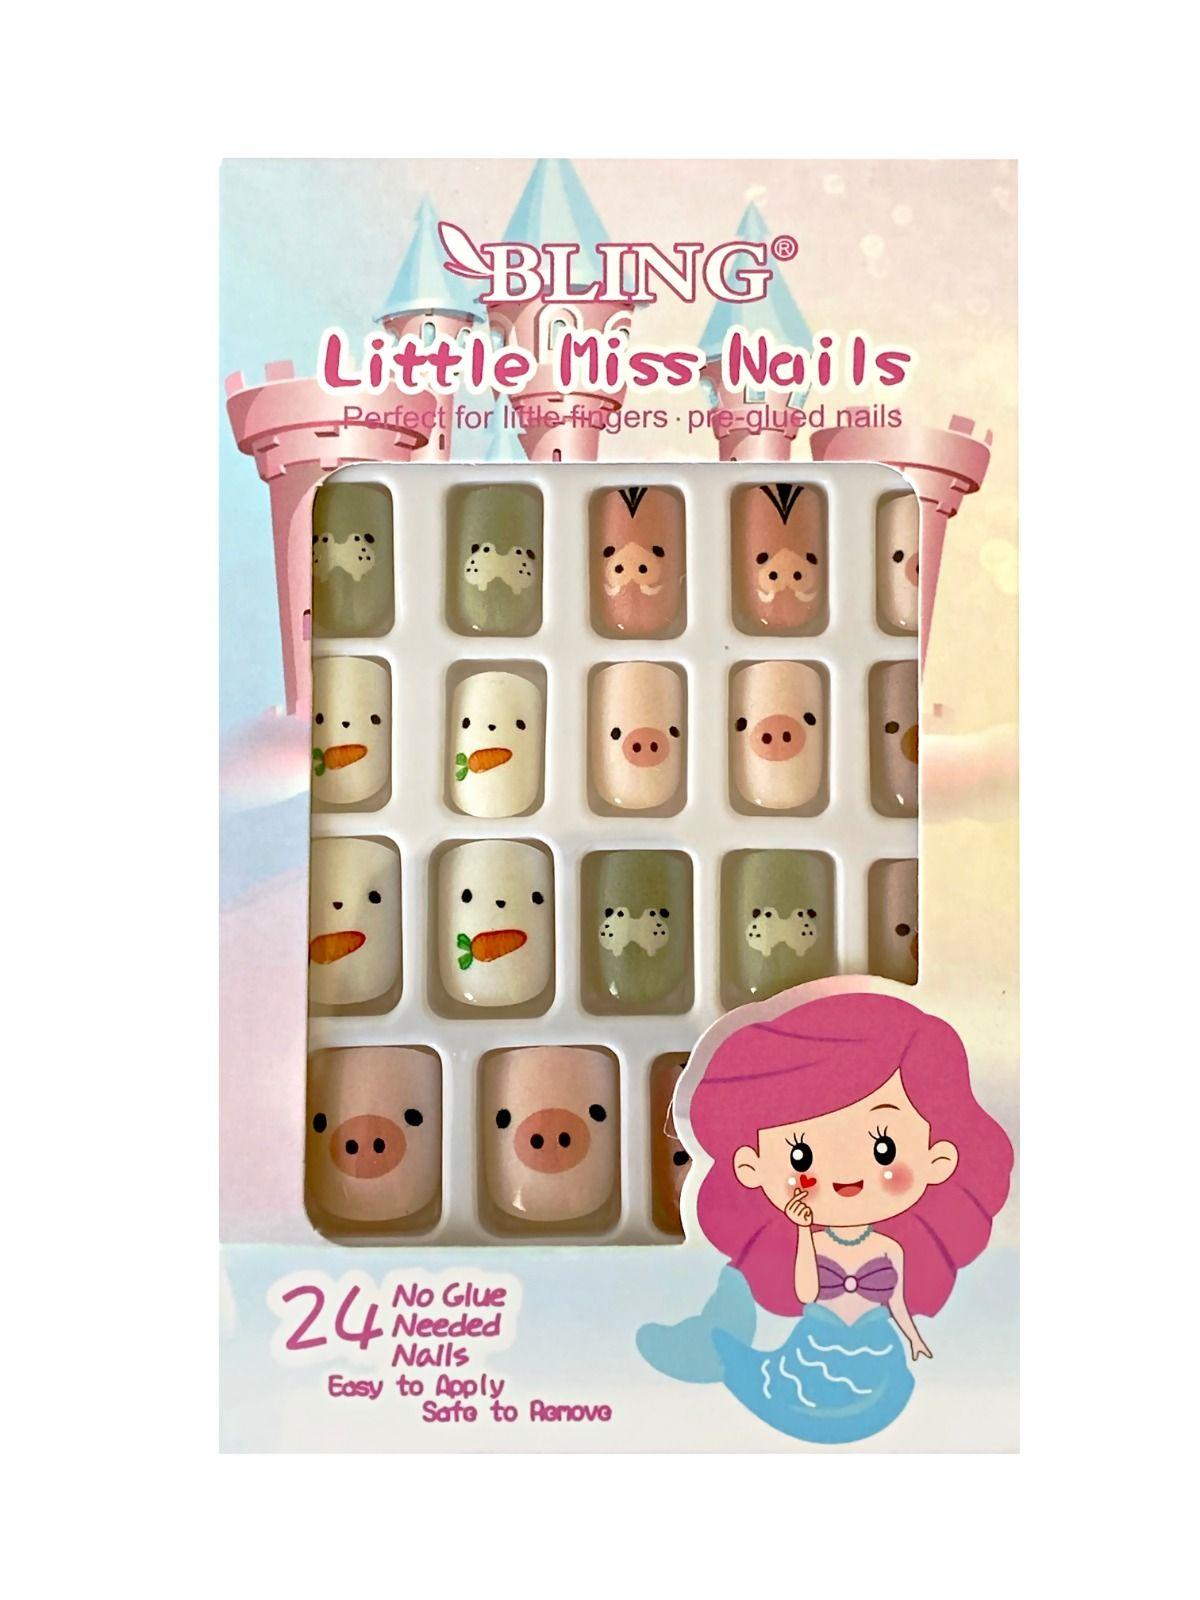 Artificial nails for children, 24 pcs - type III